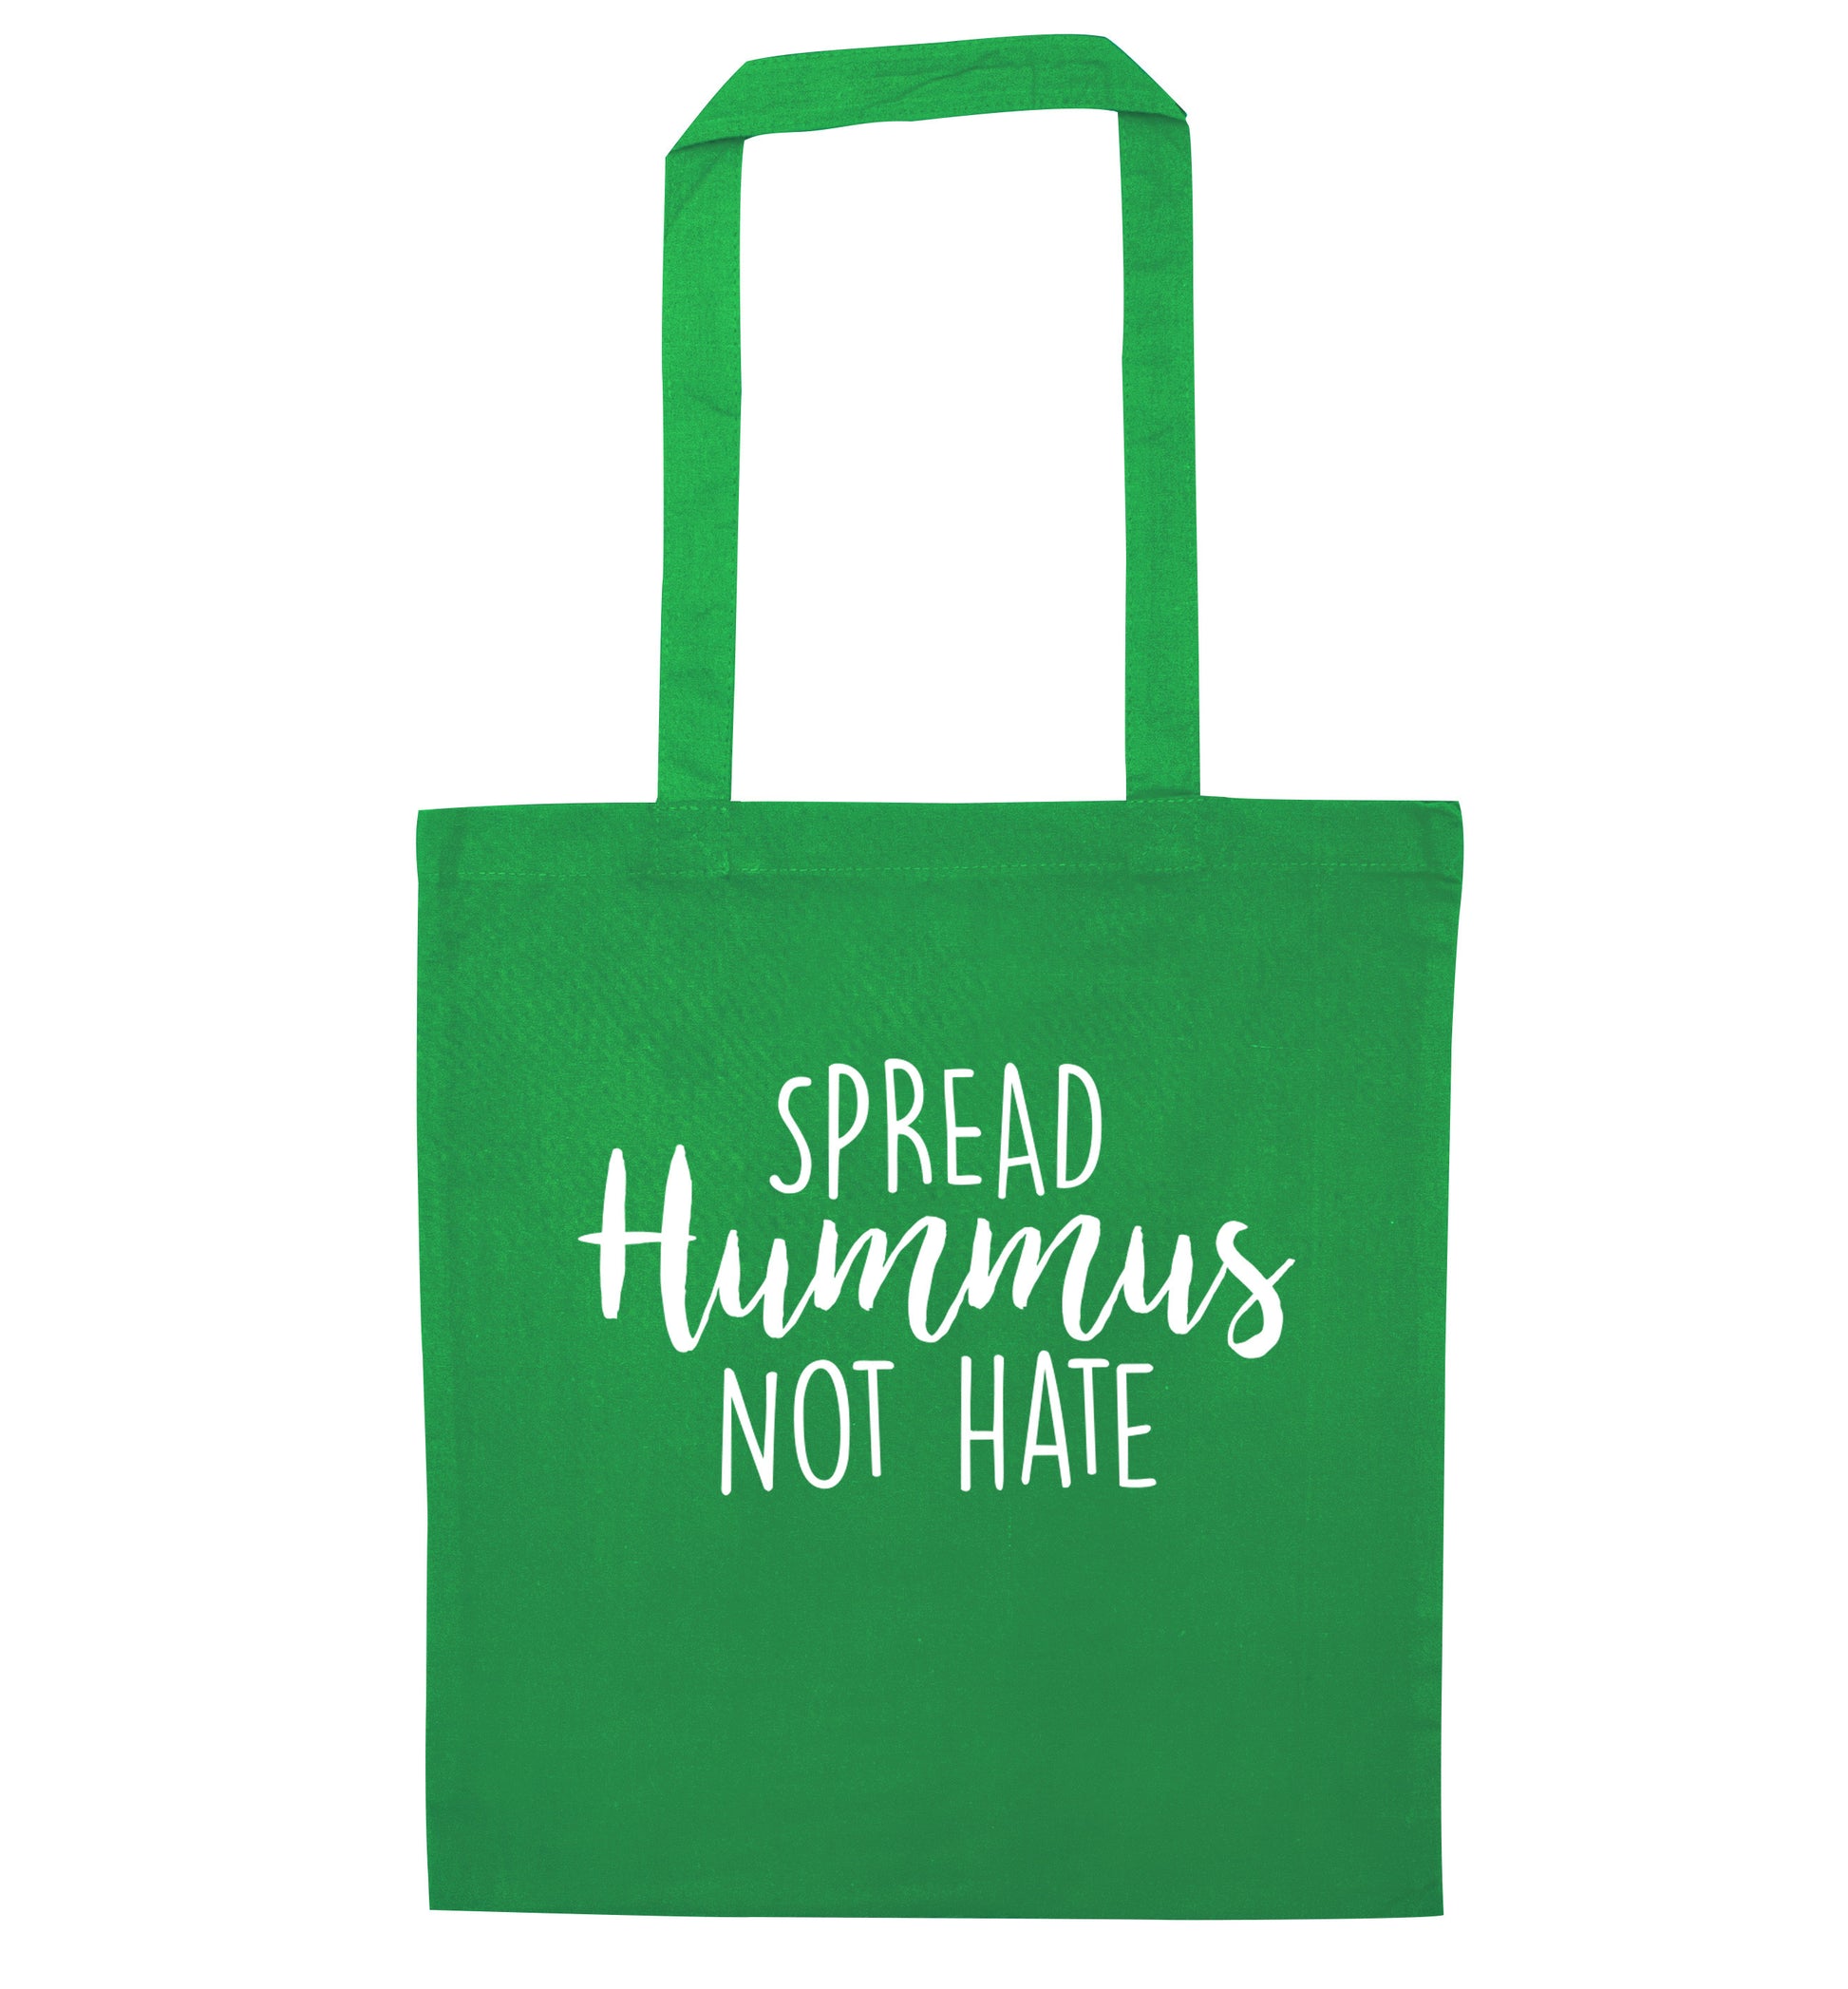 Spread hummus not hate script text green tote bag